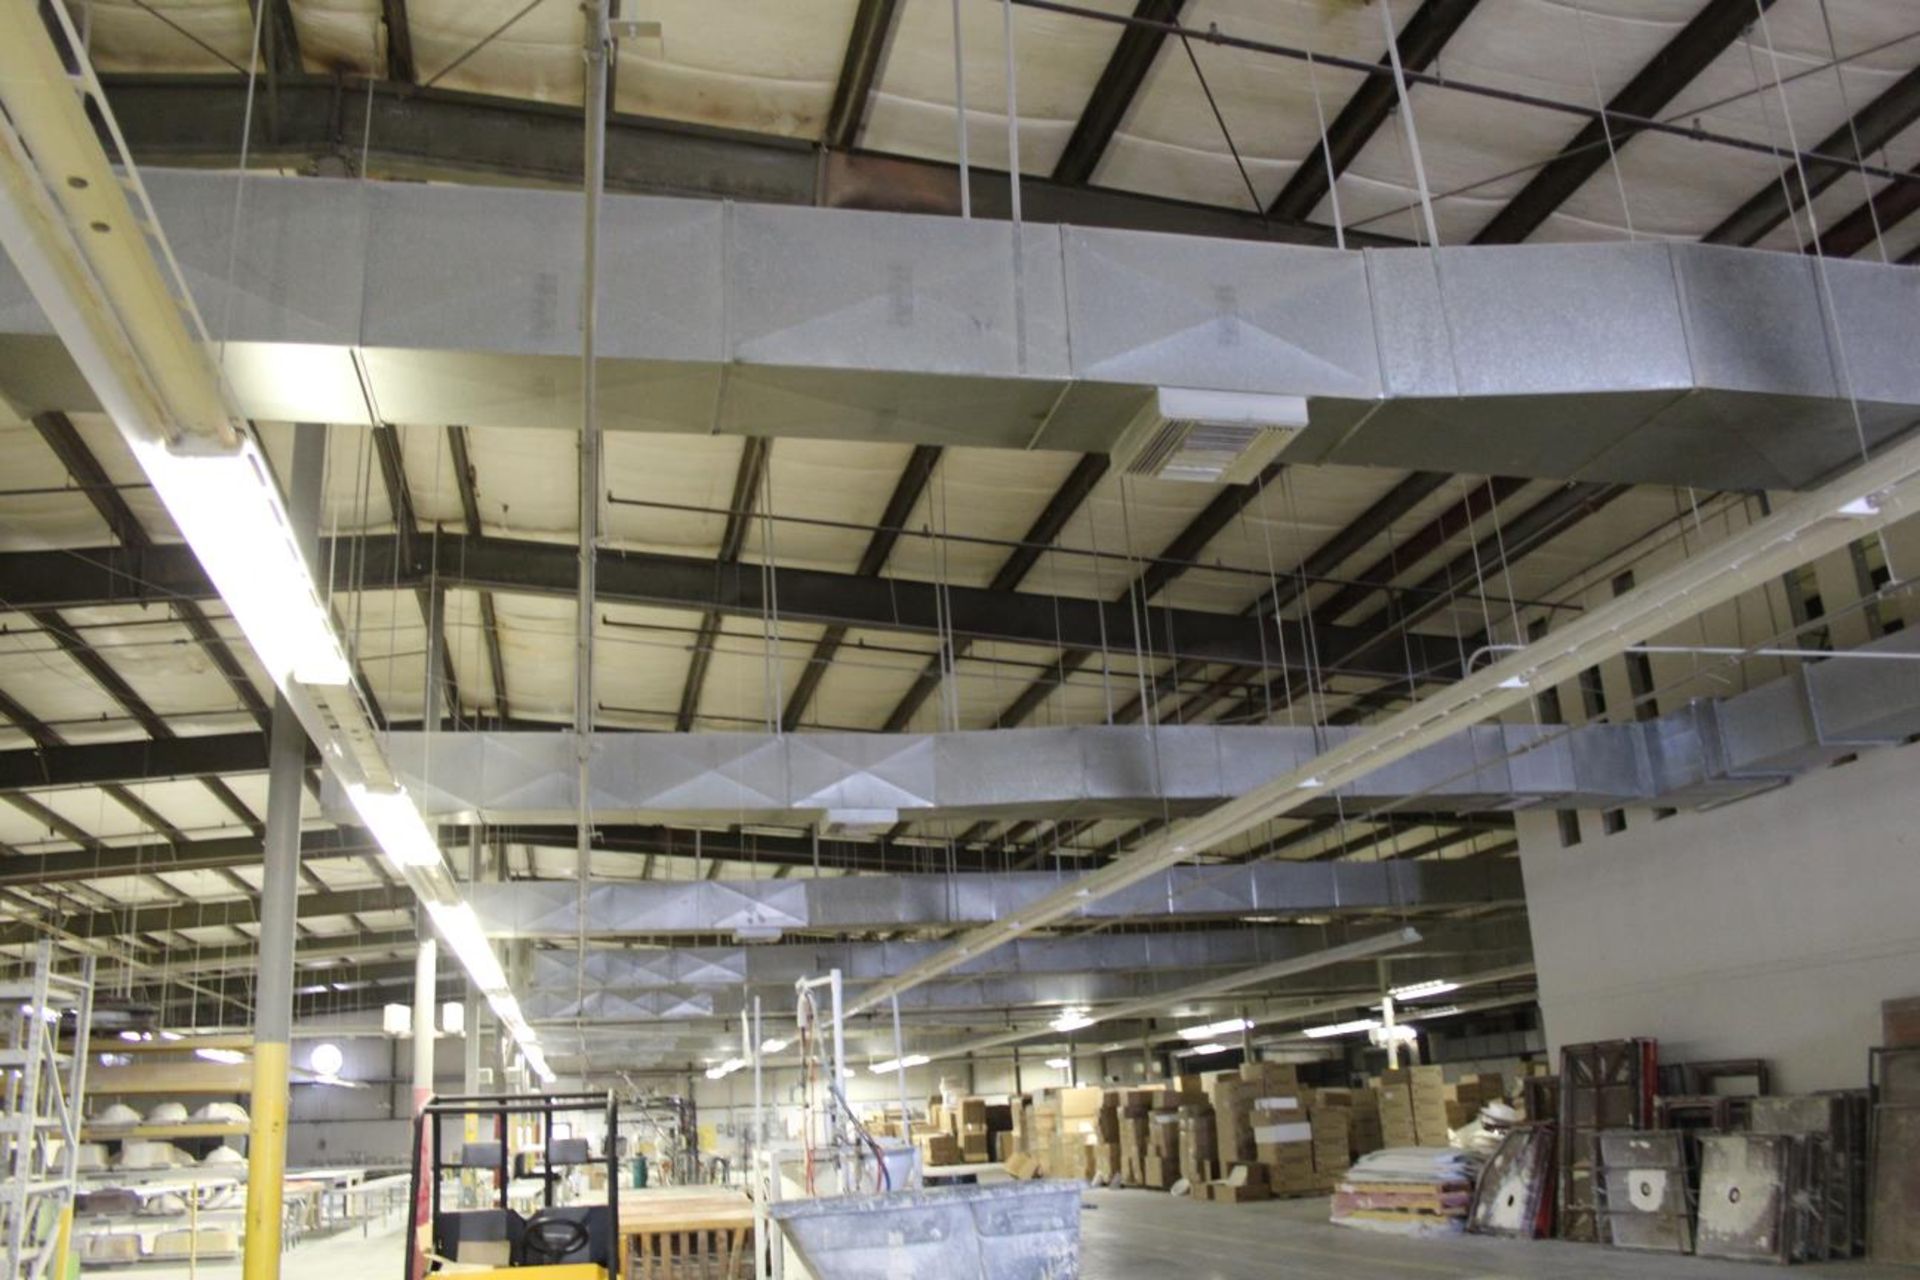 Square Duct Work, All of the sqare duct in the warehouse portion of the building. Office Ducts Are